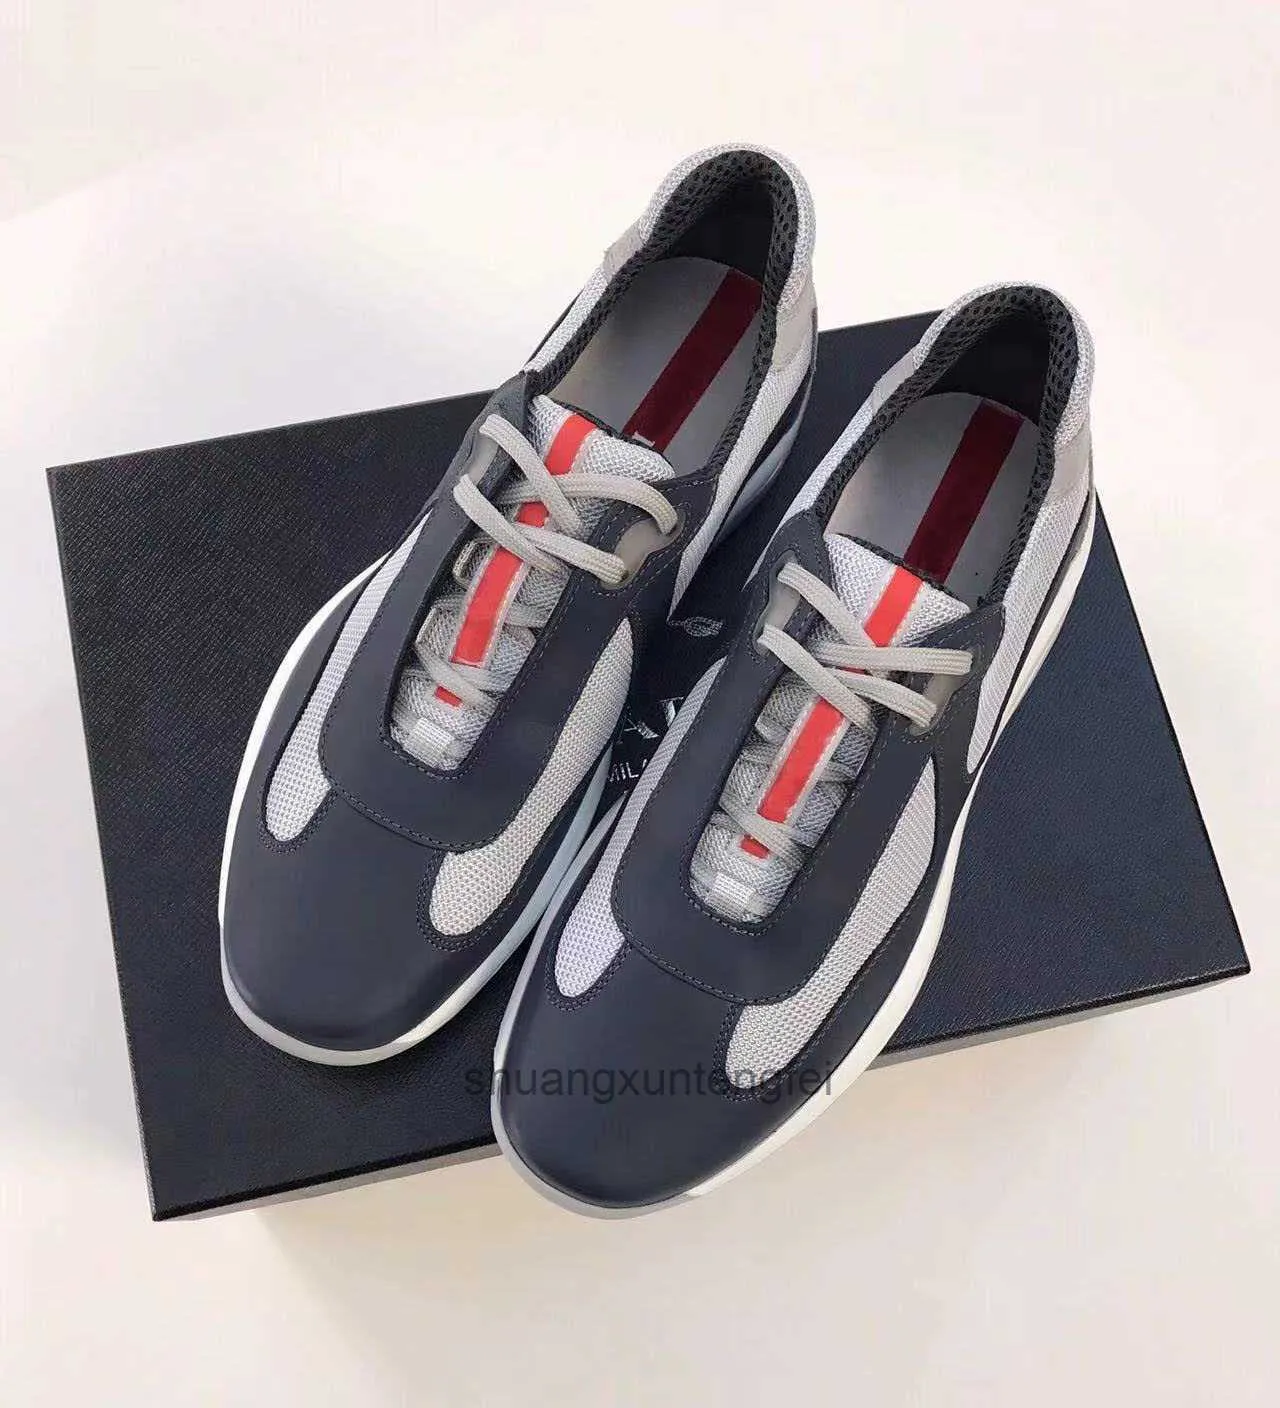 Perfect-brands America Cup Sneakers Shoes Comfort Casual Walking Men Sports Mesh Lightweight Skateboard Runner Sole Tech Fabrics Trainer with box